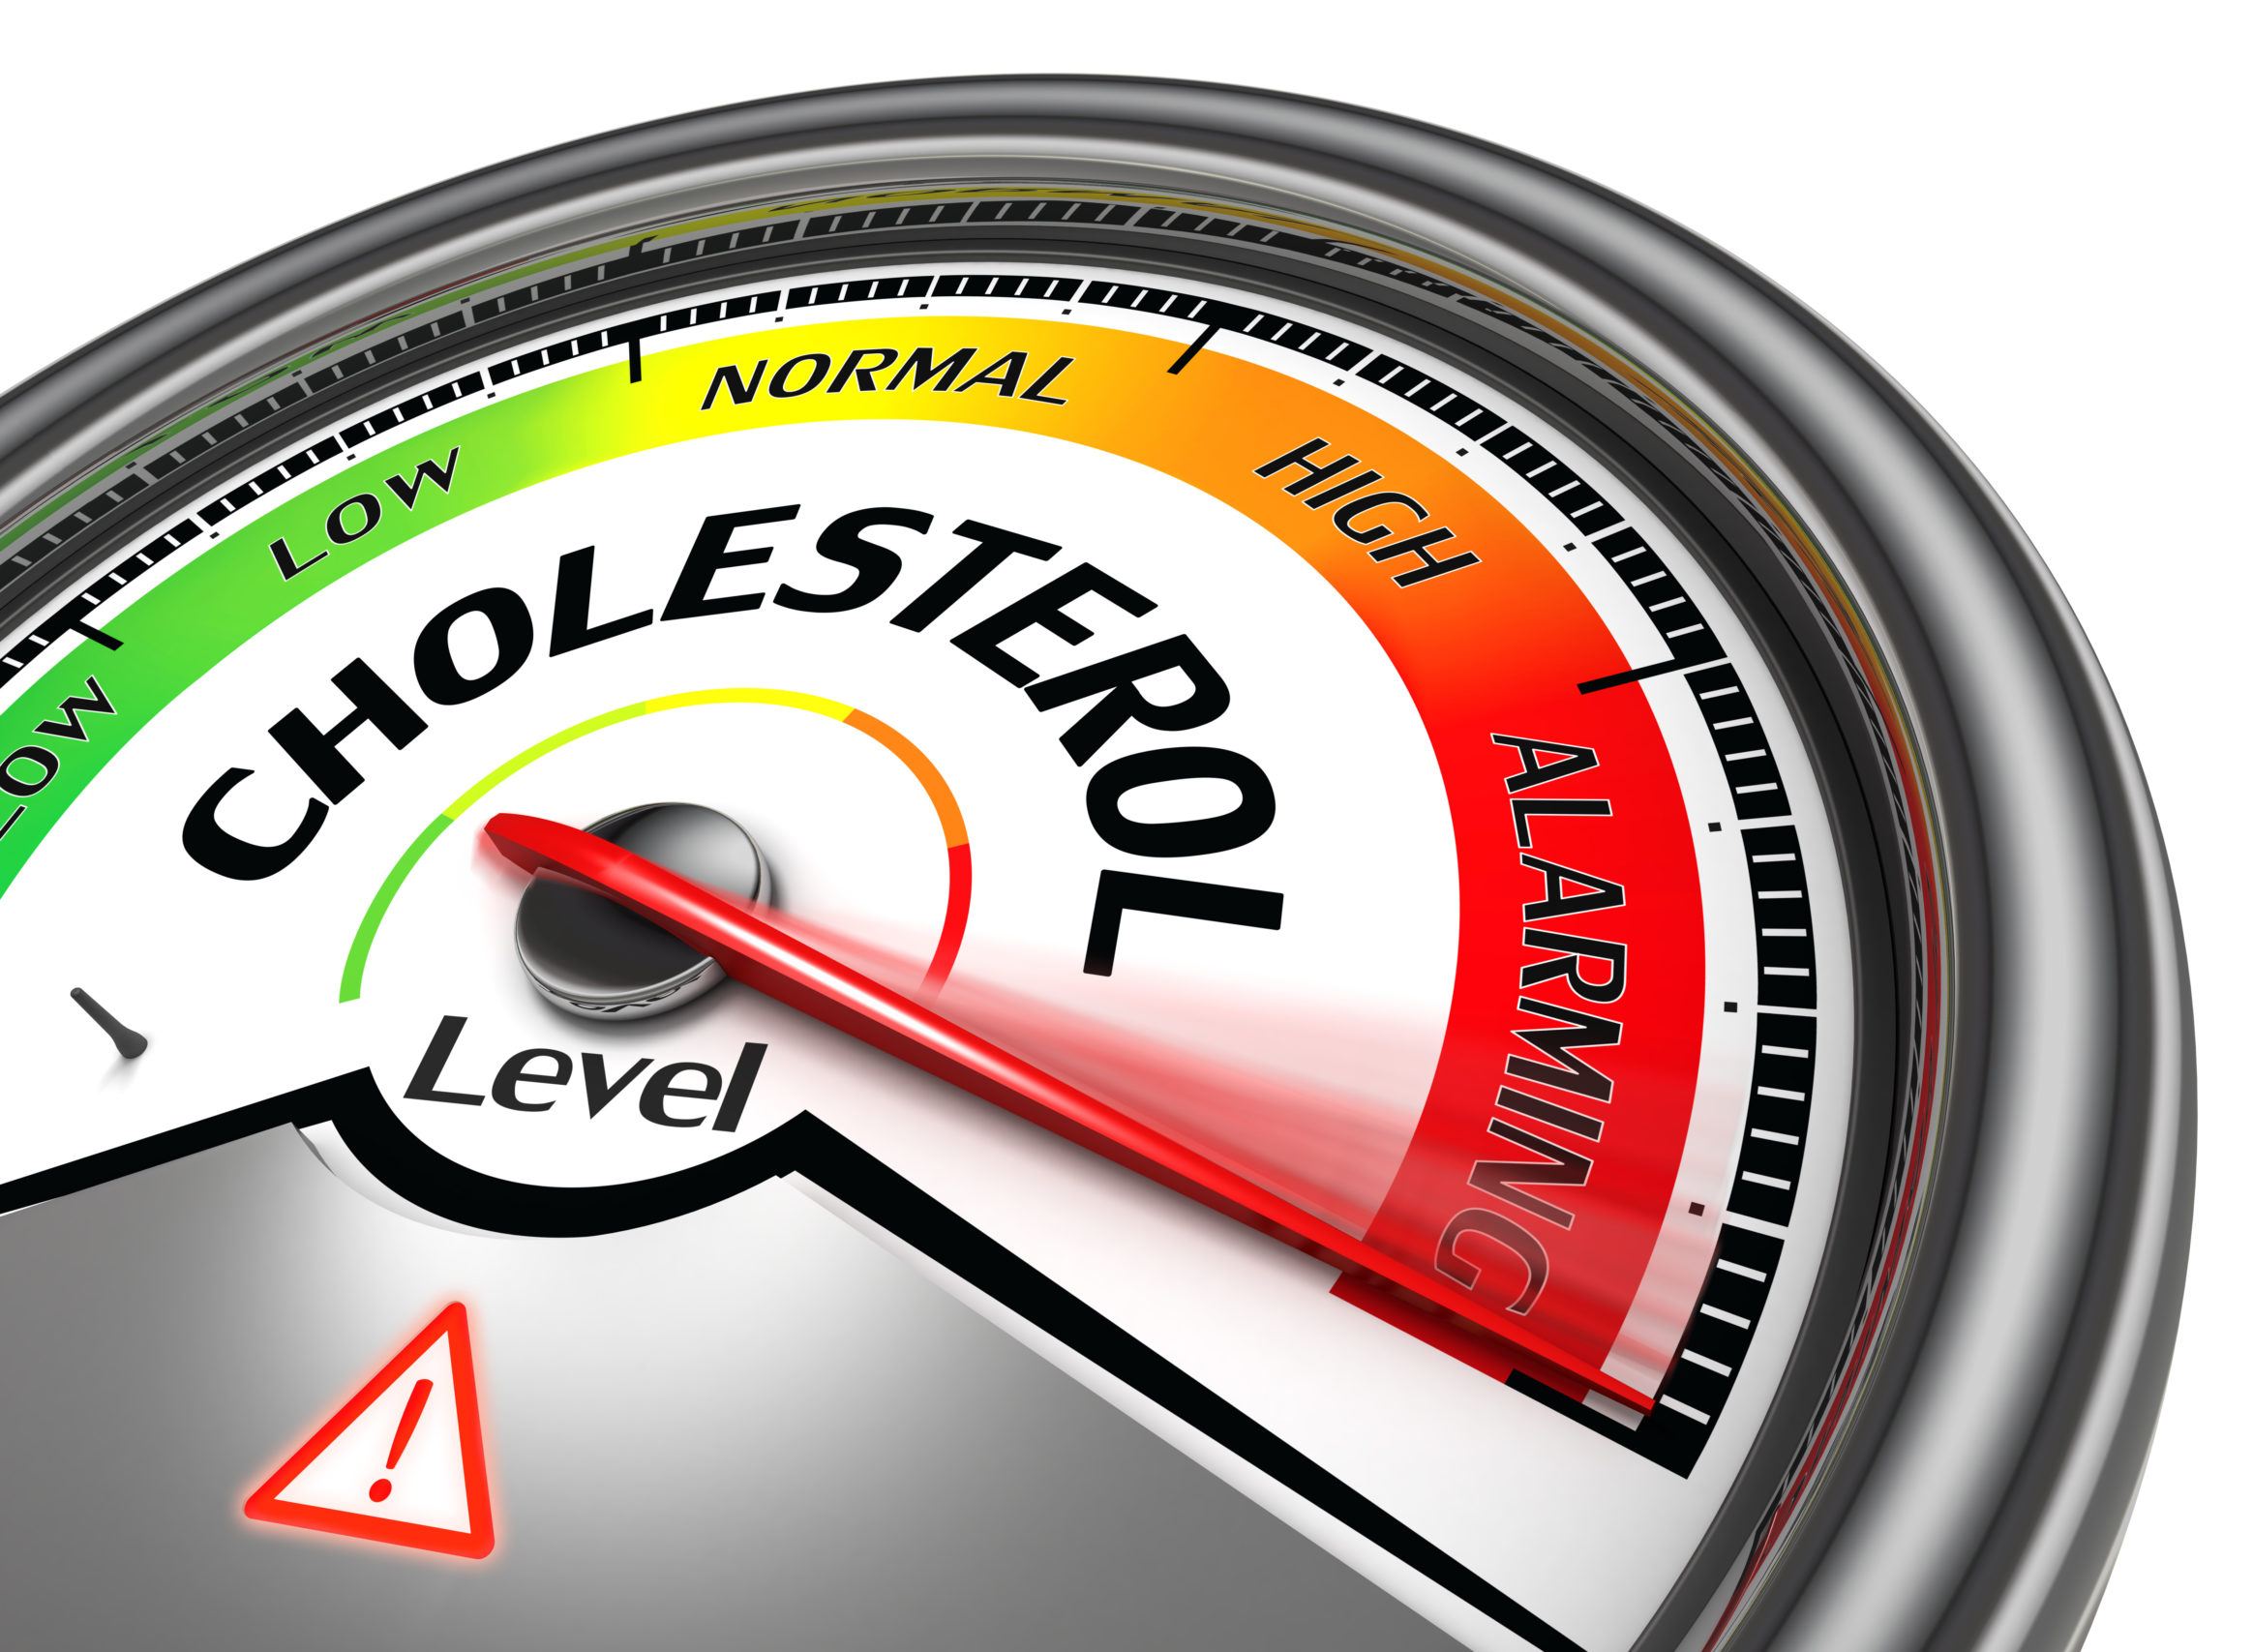 cholesterol levels too high for life insurance?